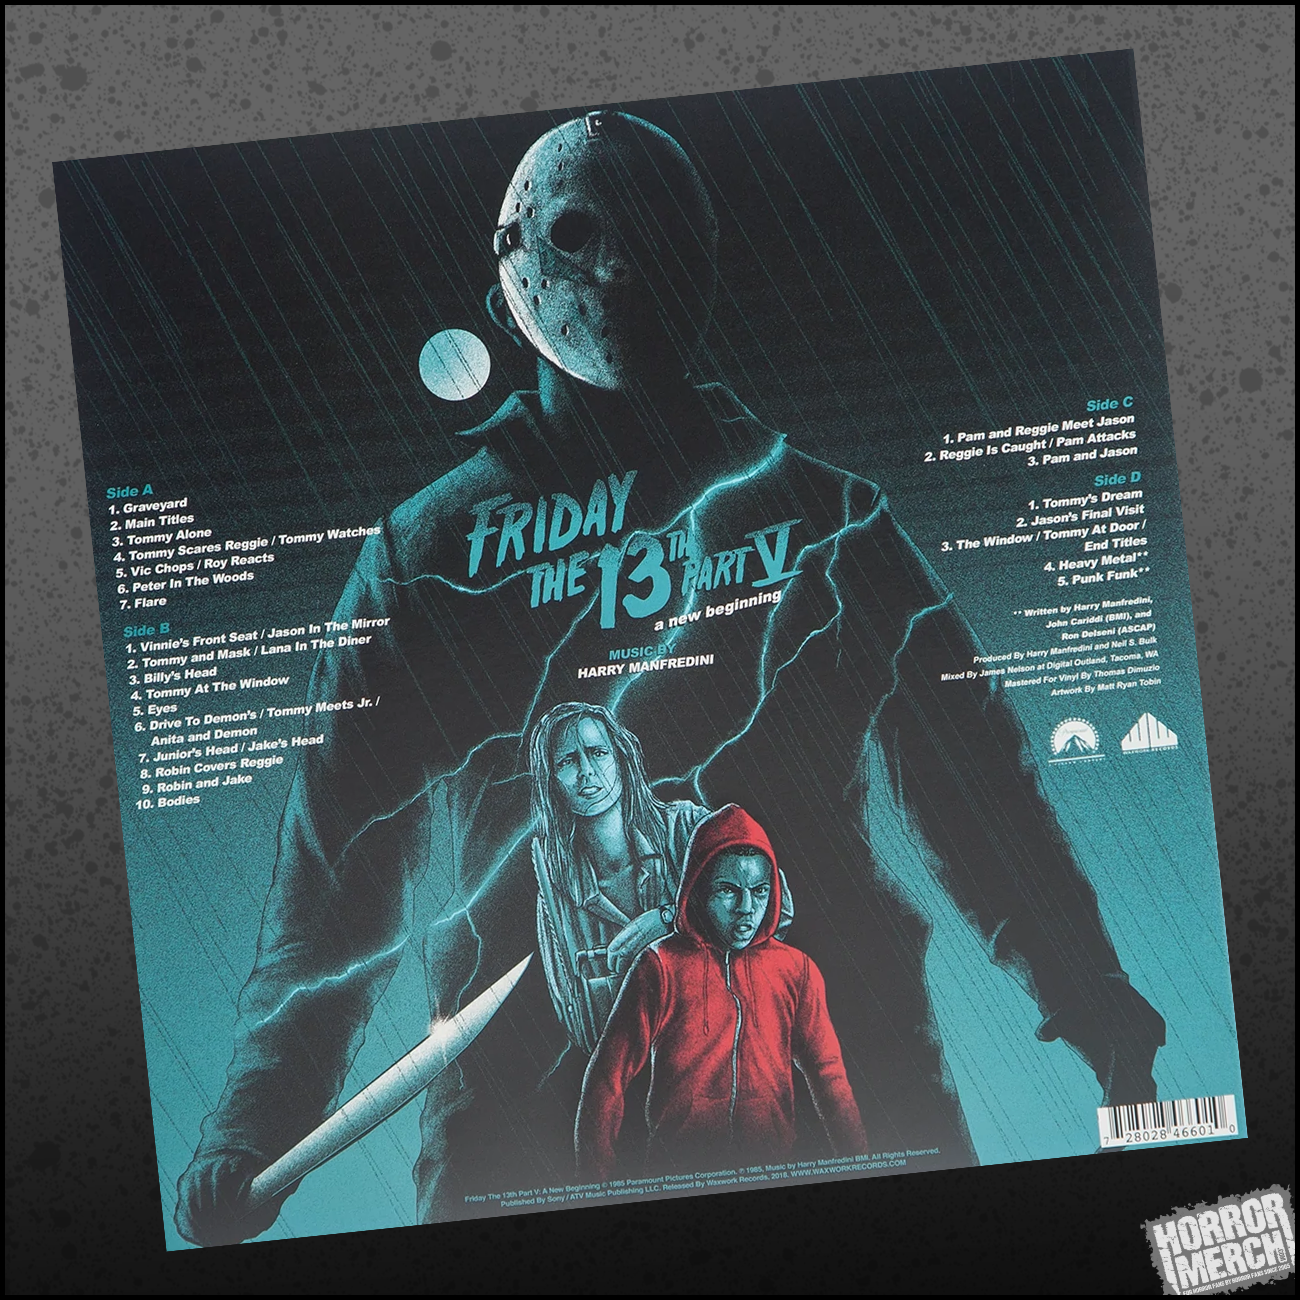 Friday The 13th [Soundtrack] - Free Shipping!